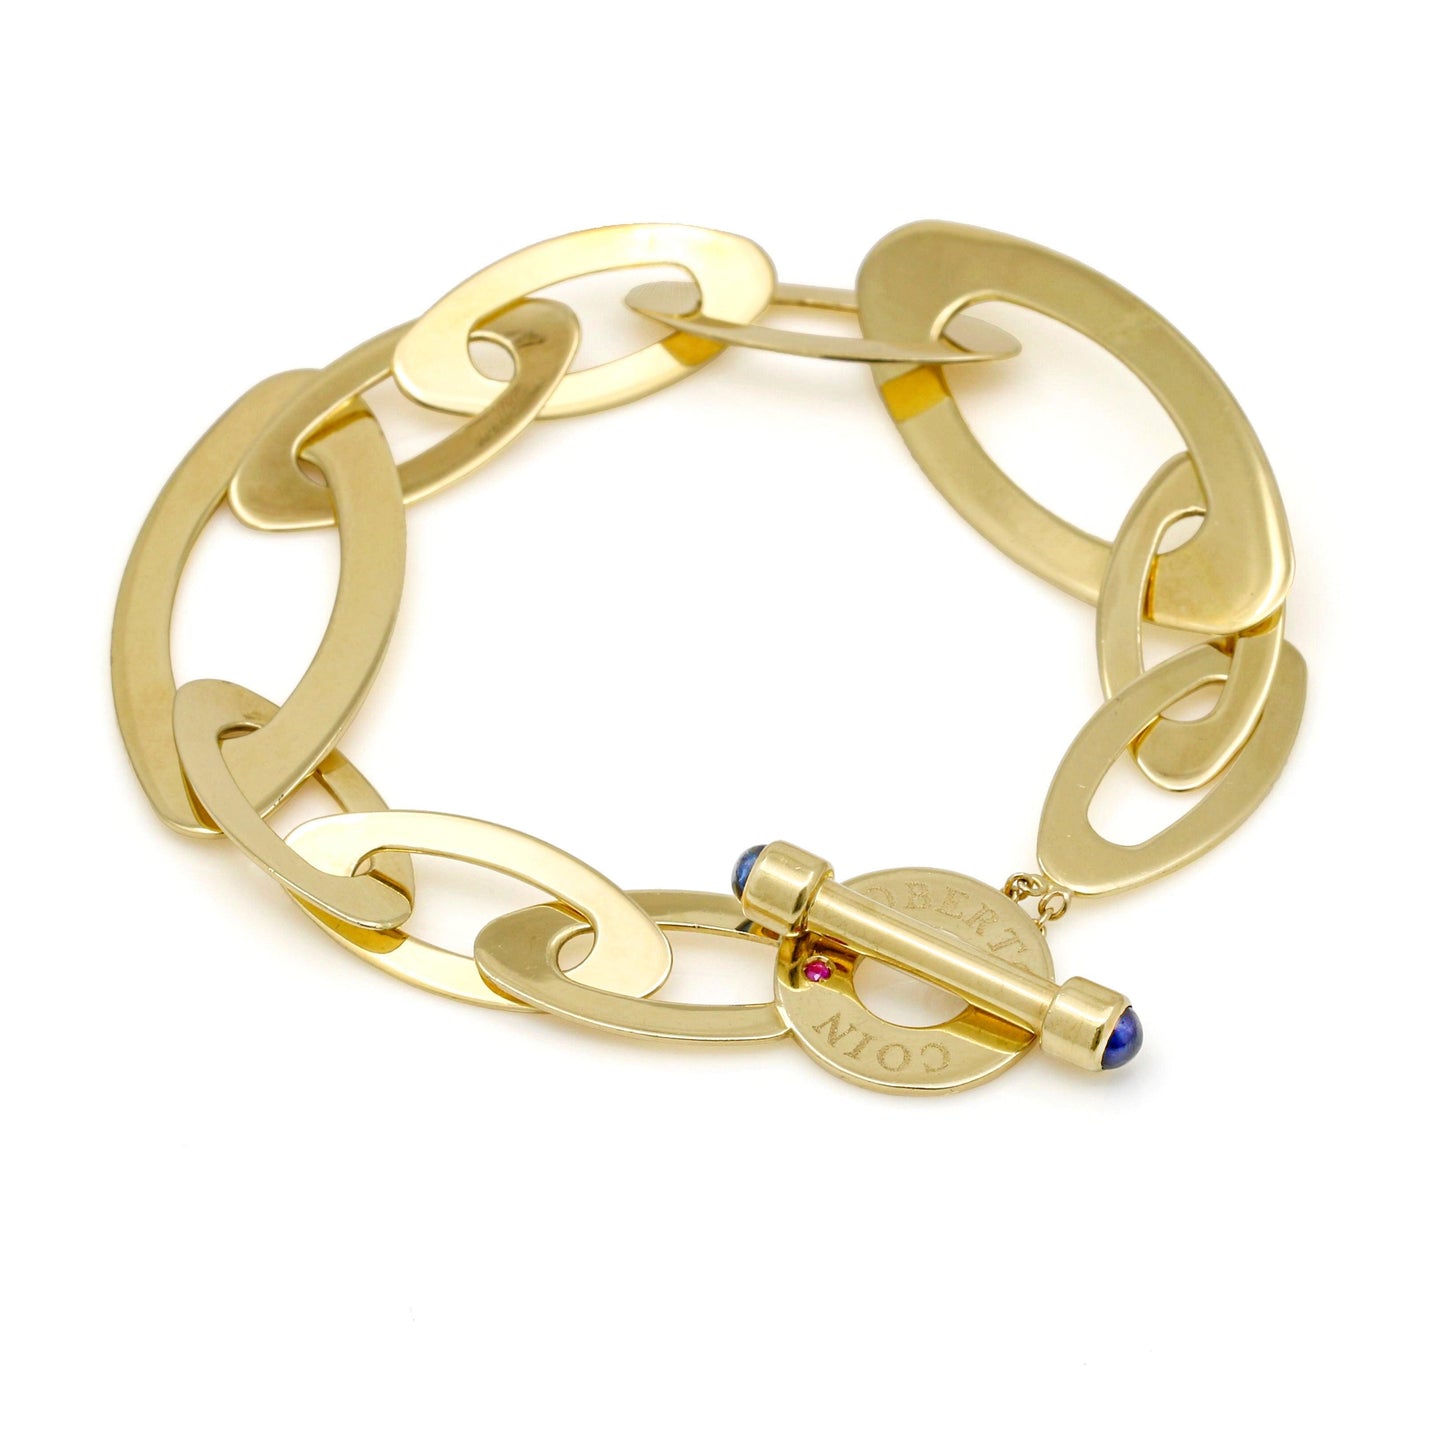 Roberto Coin Chic and Shine X-Large Oval Link Toggle Bracelet in 18k Yellow Gold - 31 Jewels Inc.